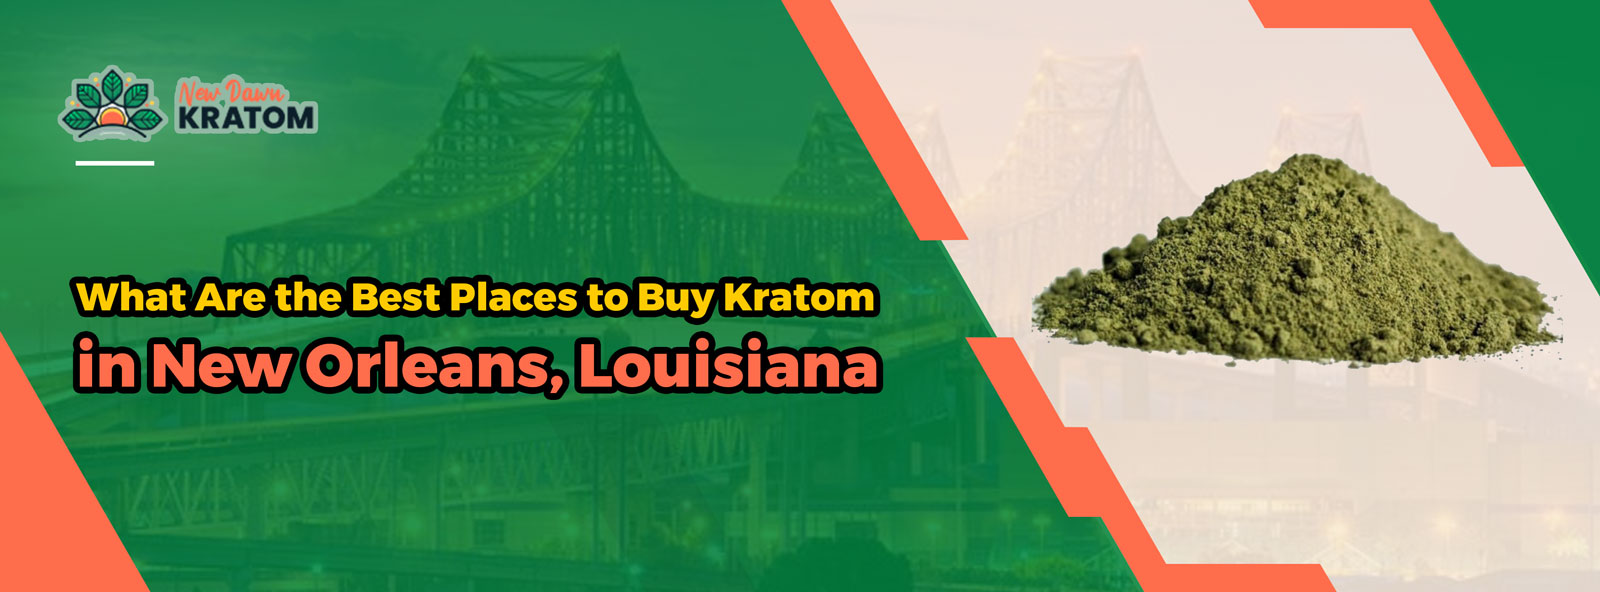 What Are the Best Places to Buy Kratom in New Orleans, Louisiana